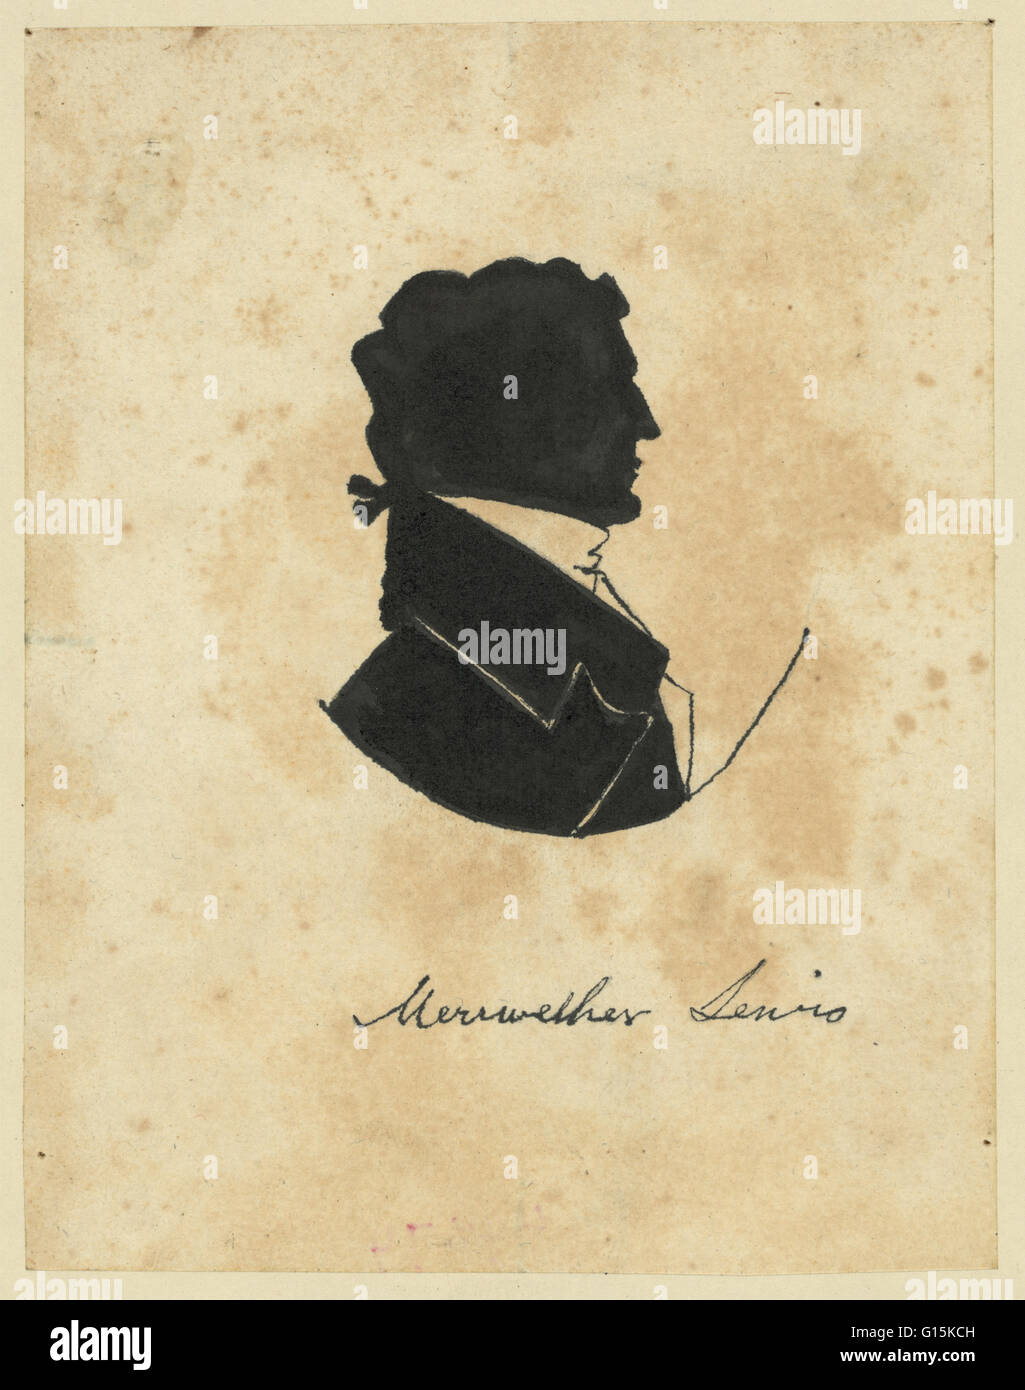 A drawing in ink over a graphite underdrawing of the silhouette of Lewis, by John Marshal. Meriwether Lewis (August 18, 1774 - October 11, 1809) was an American explorer, soldier, and public administrator, best known for his role as the leader of the Lewi Stock Photo